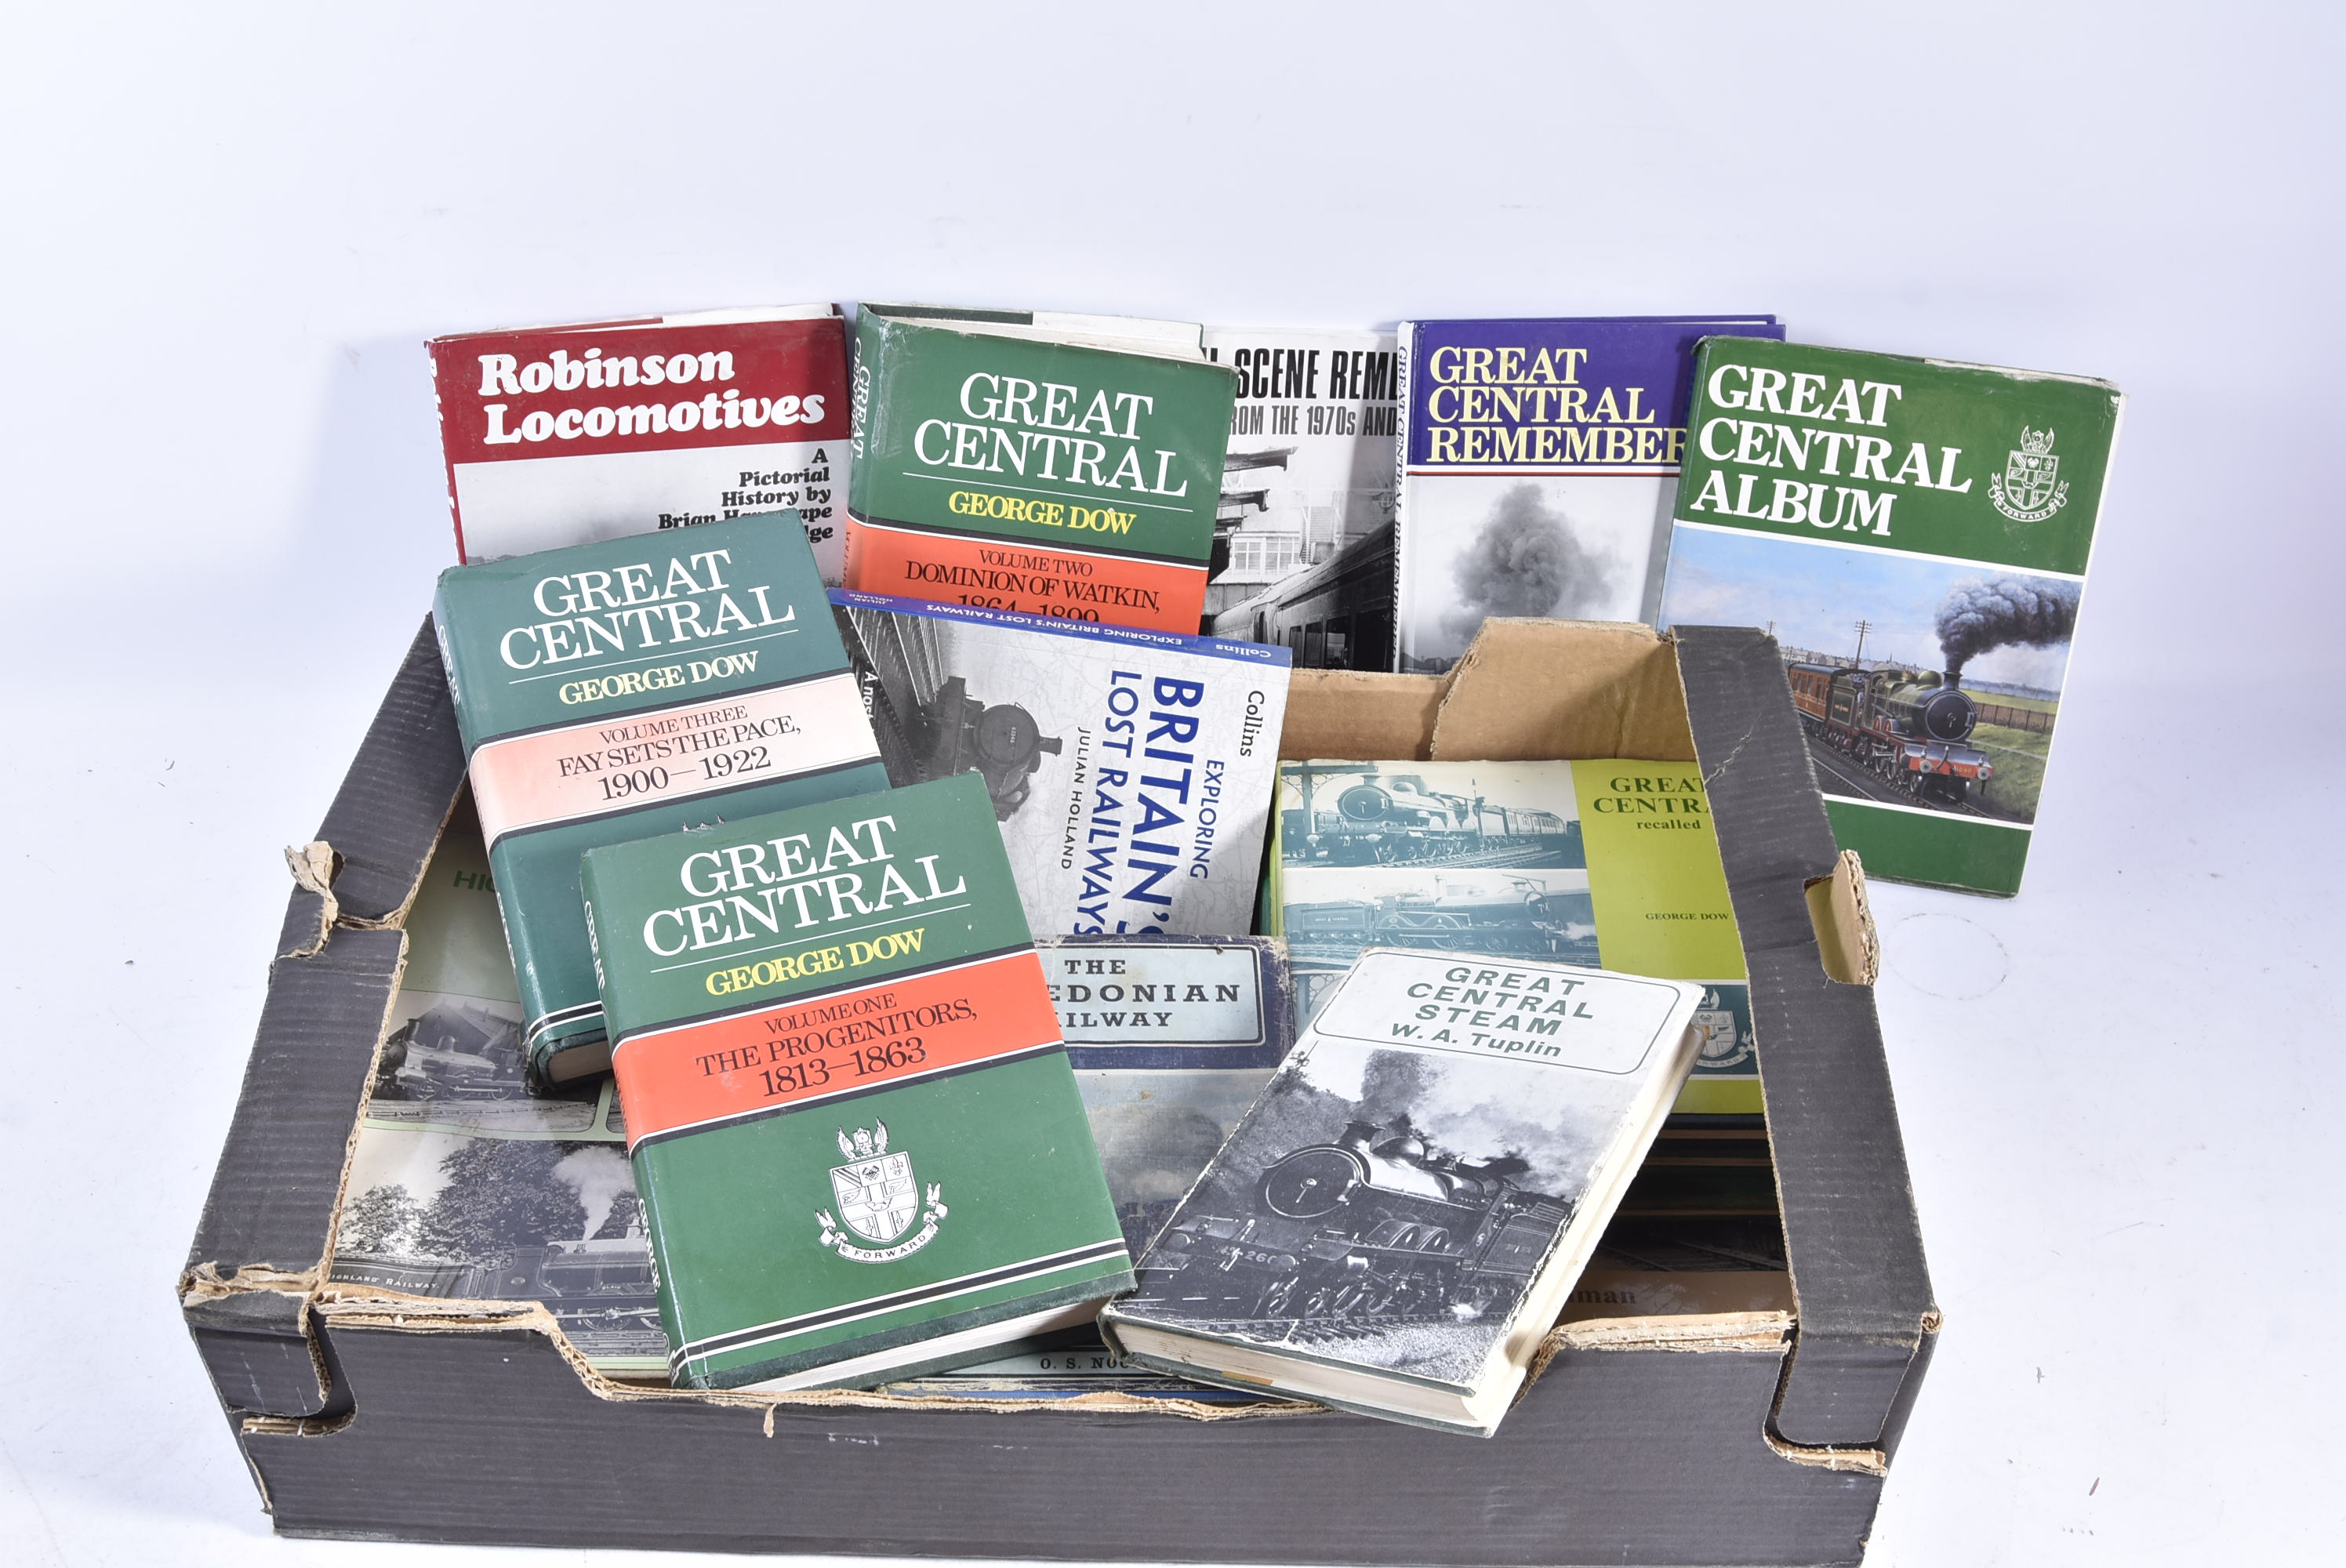 An assortment of Railway books and related literature, focusing on the GCR and Scottish lines